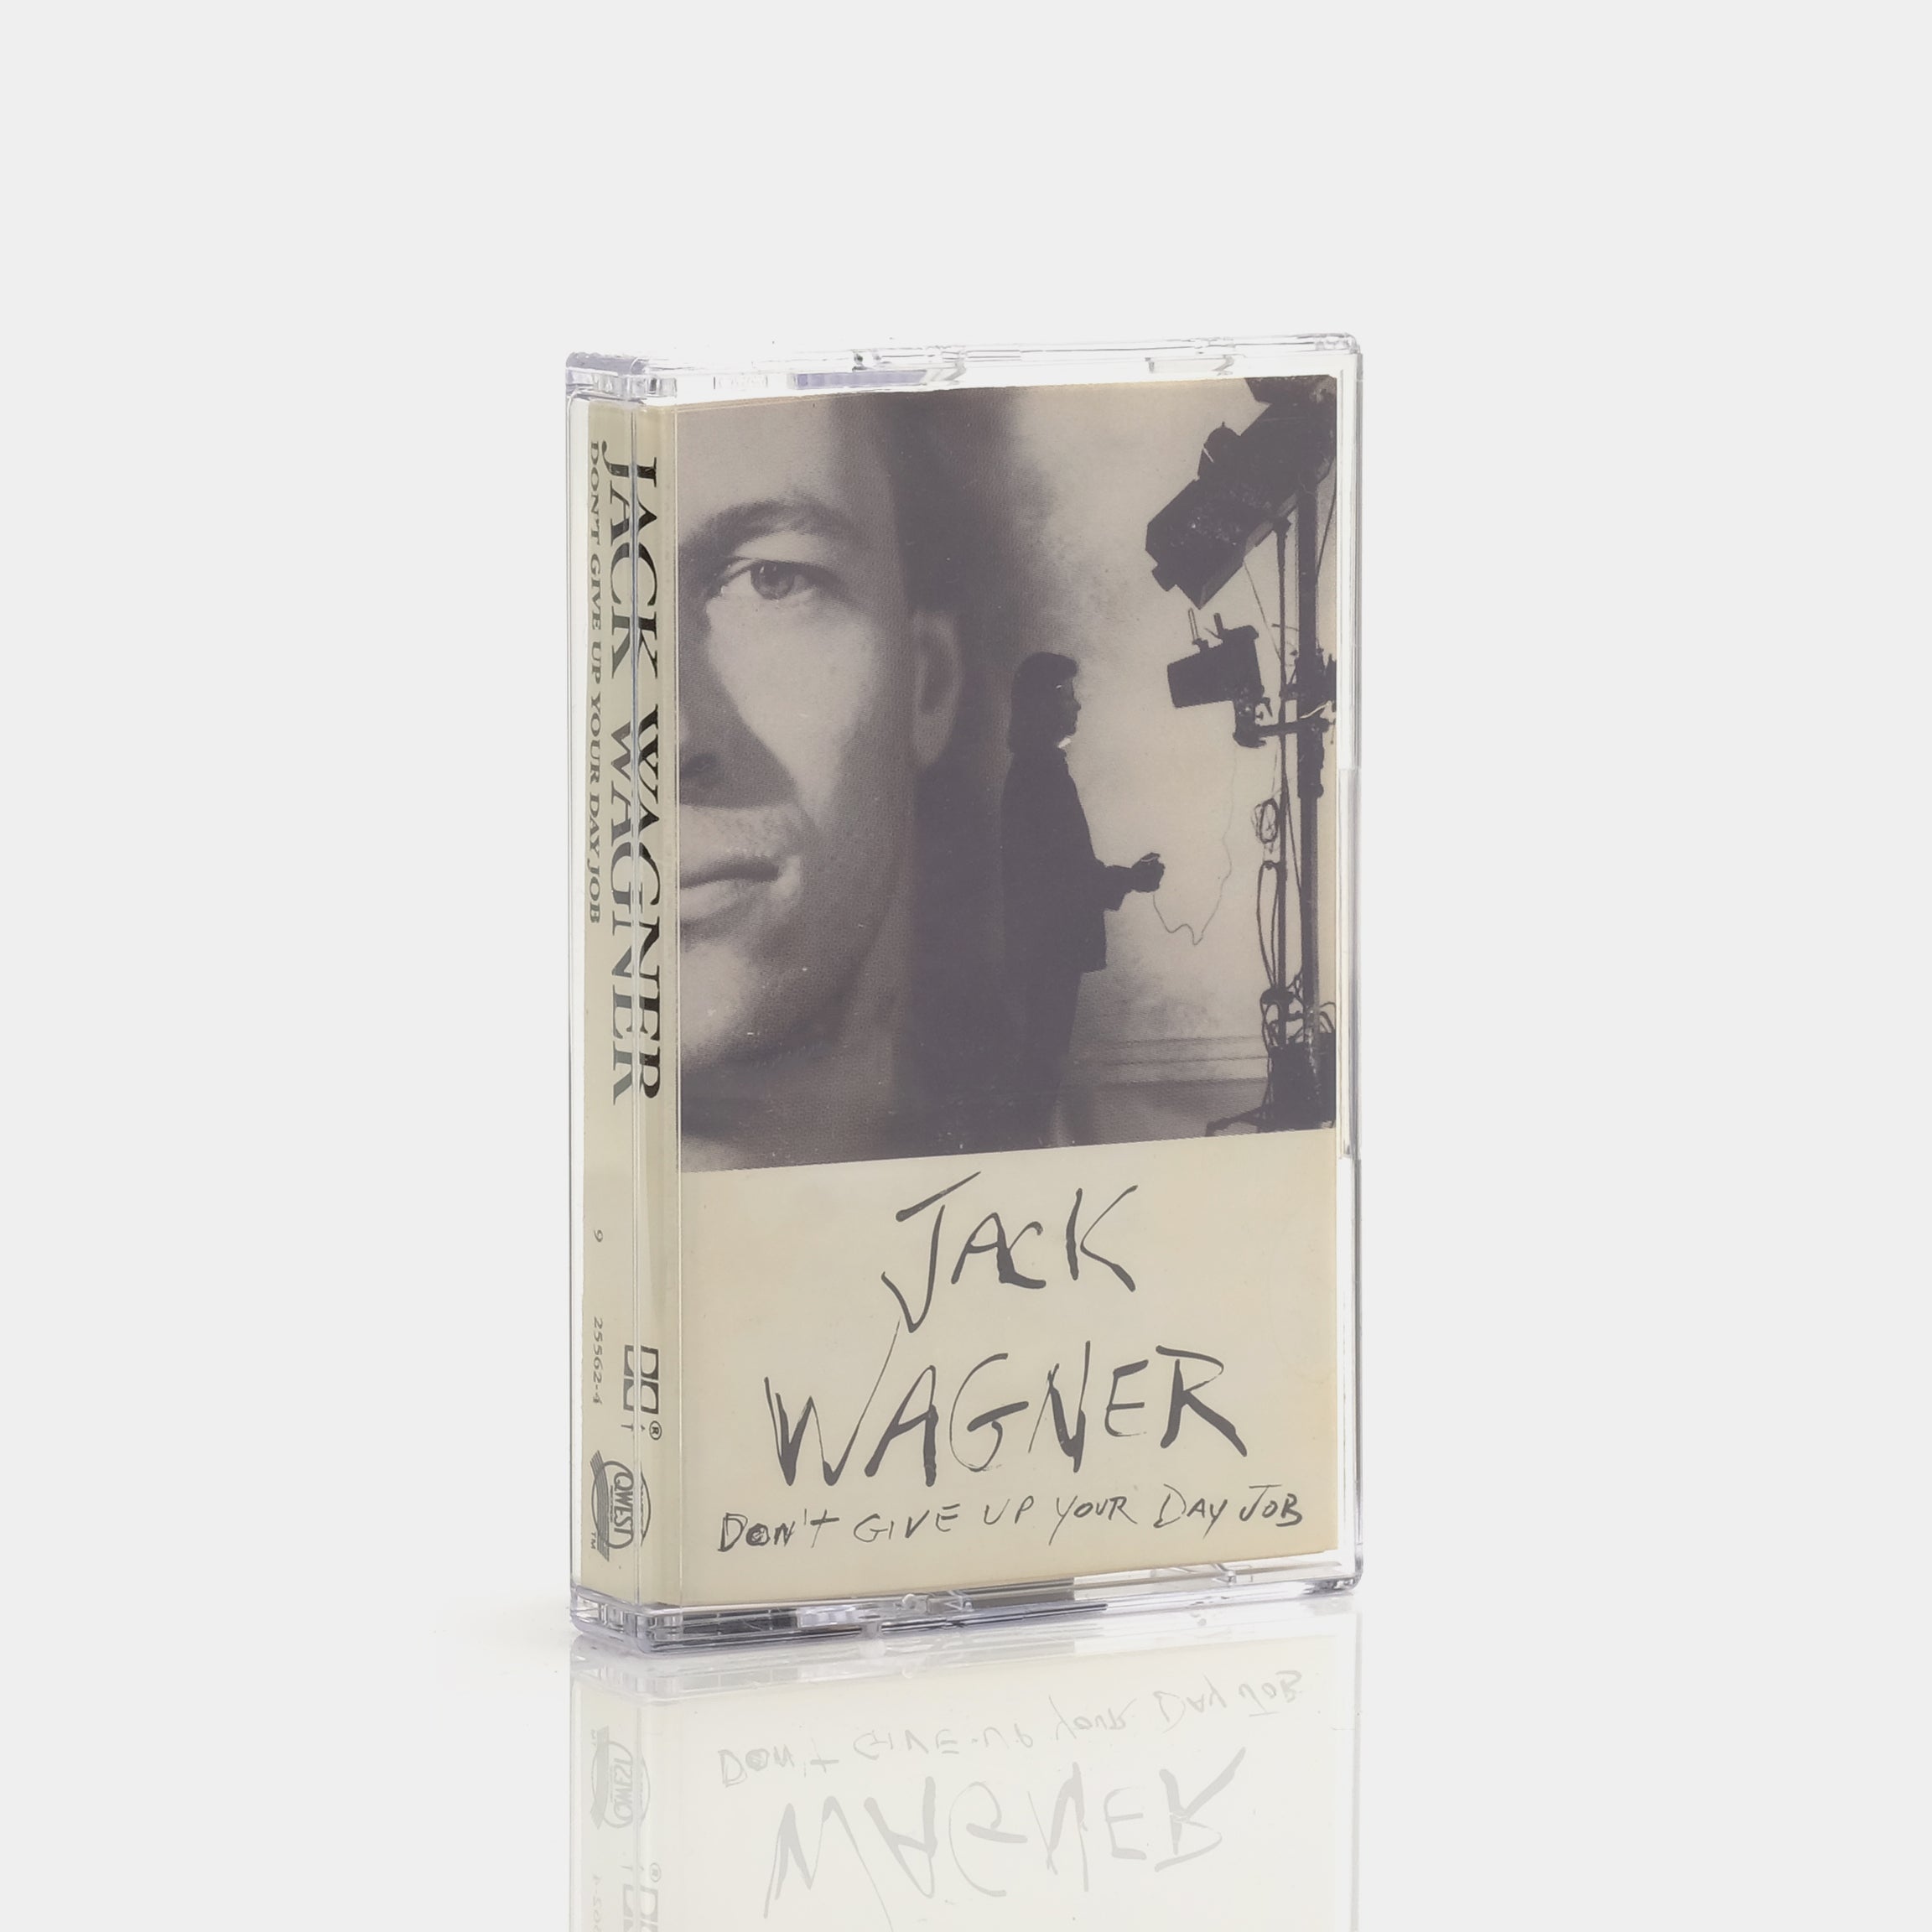 Jack Wagner - Don't Give Up Your Day Job Cassette Tape